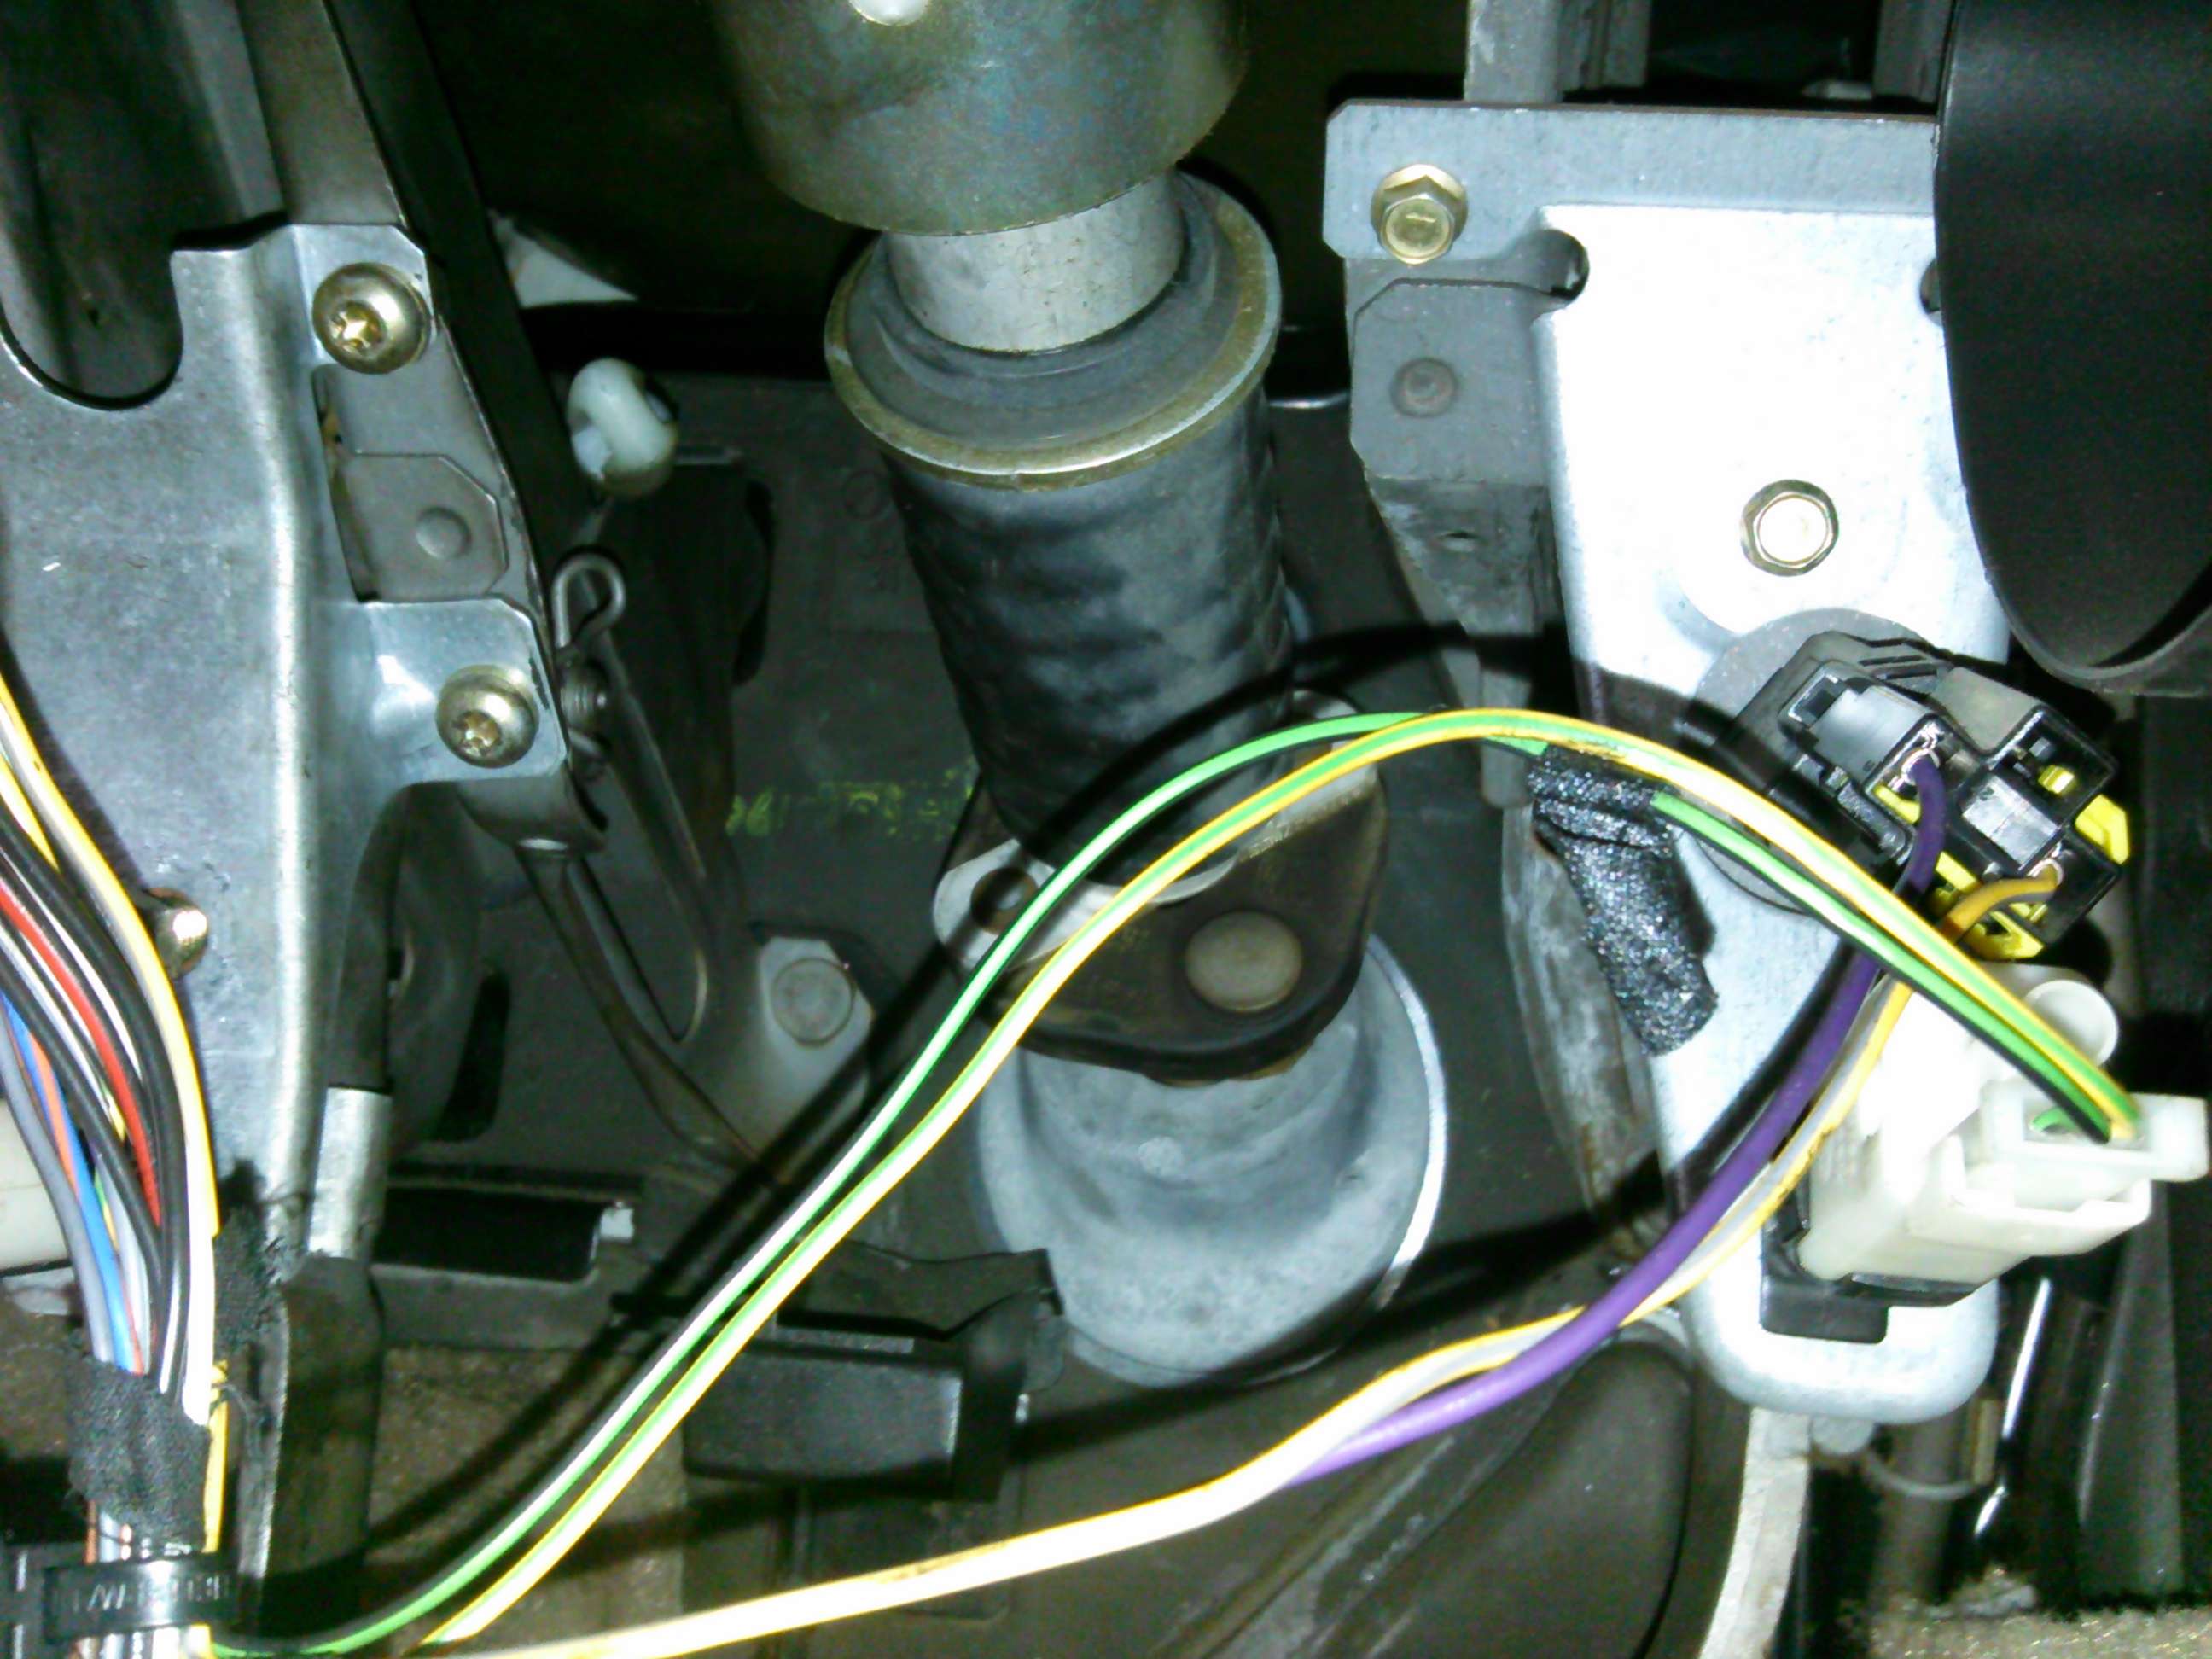 An image showing the new cable being fed into the cab